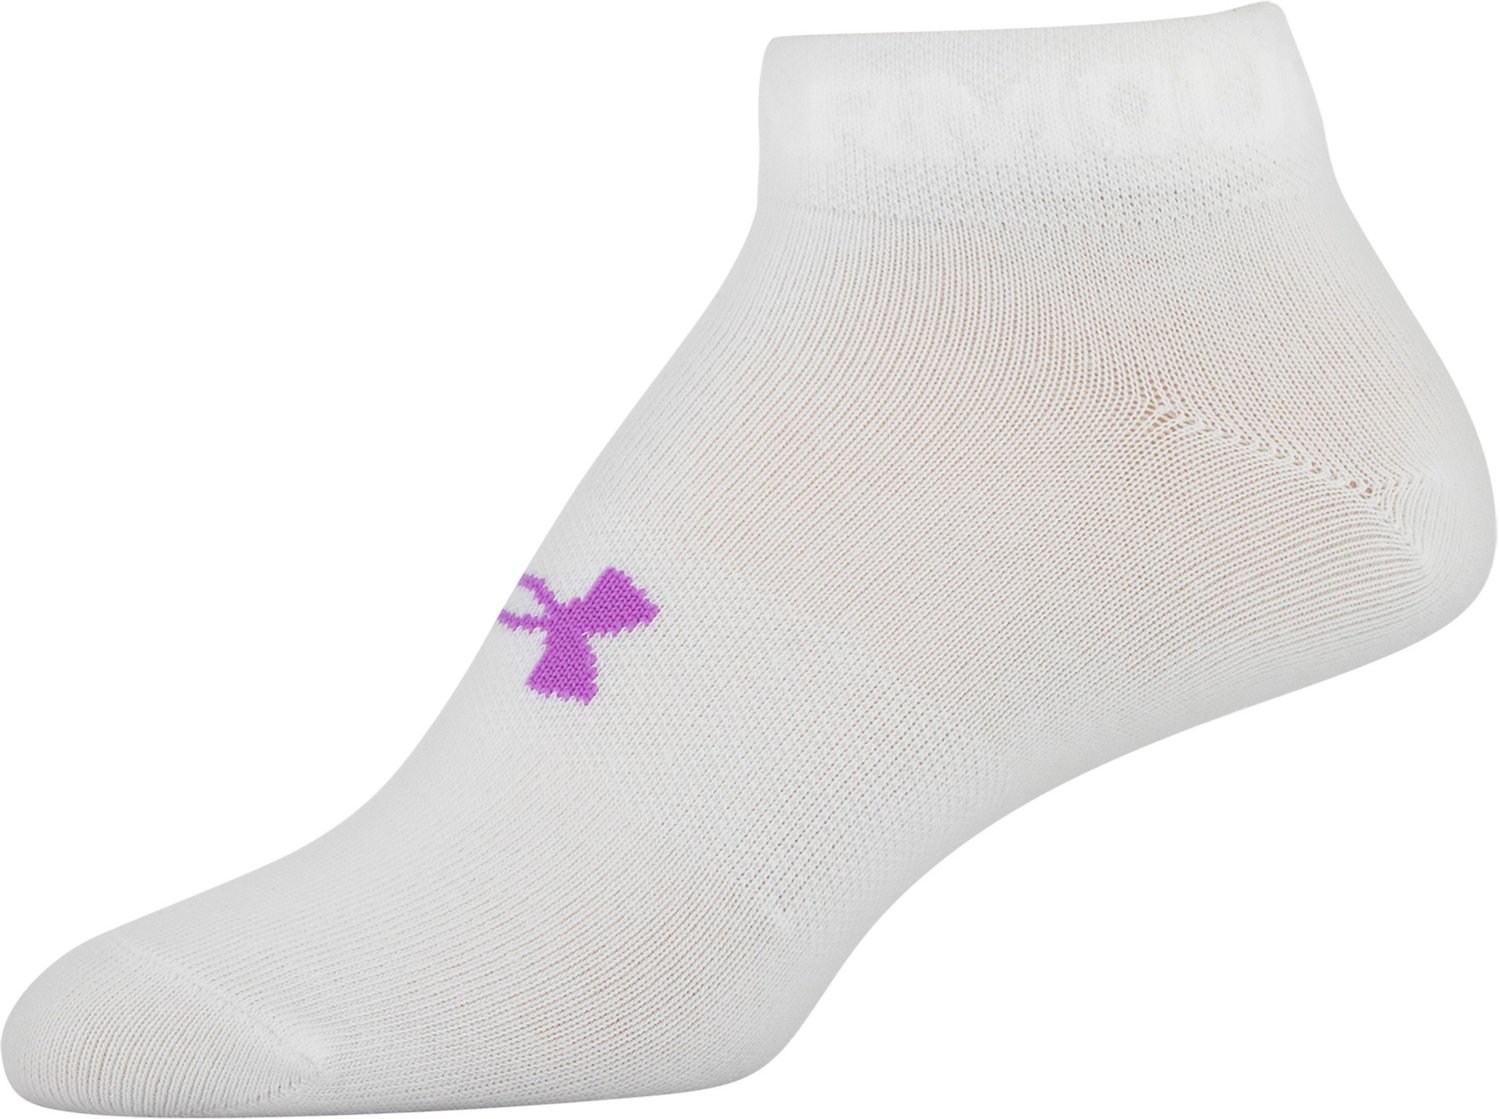 Under Armour Women's 6 Pack Essential No Show Socks